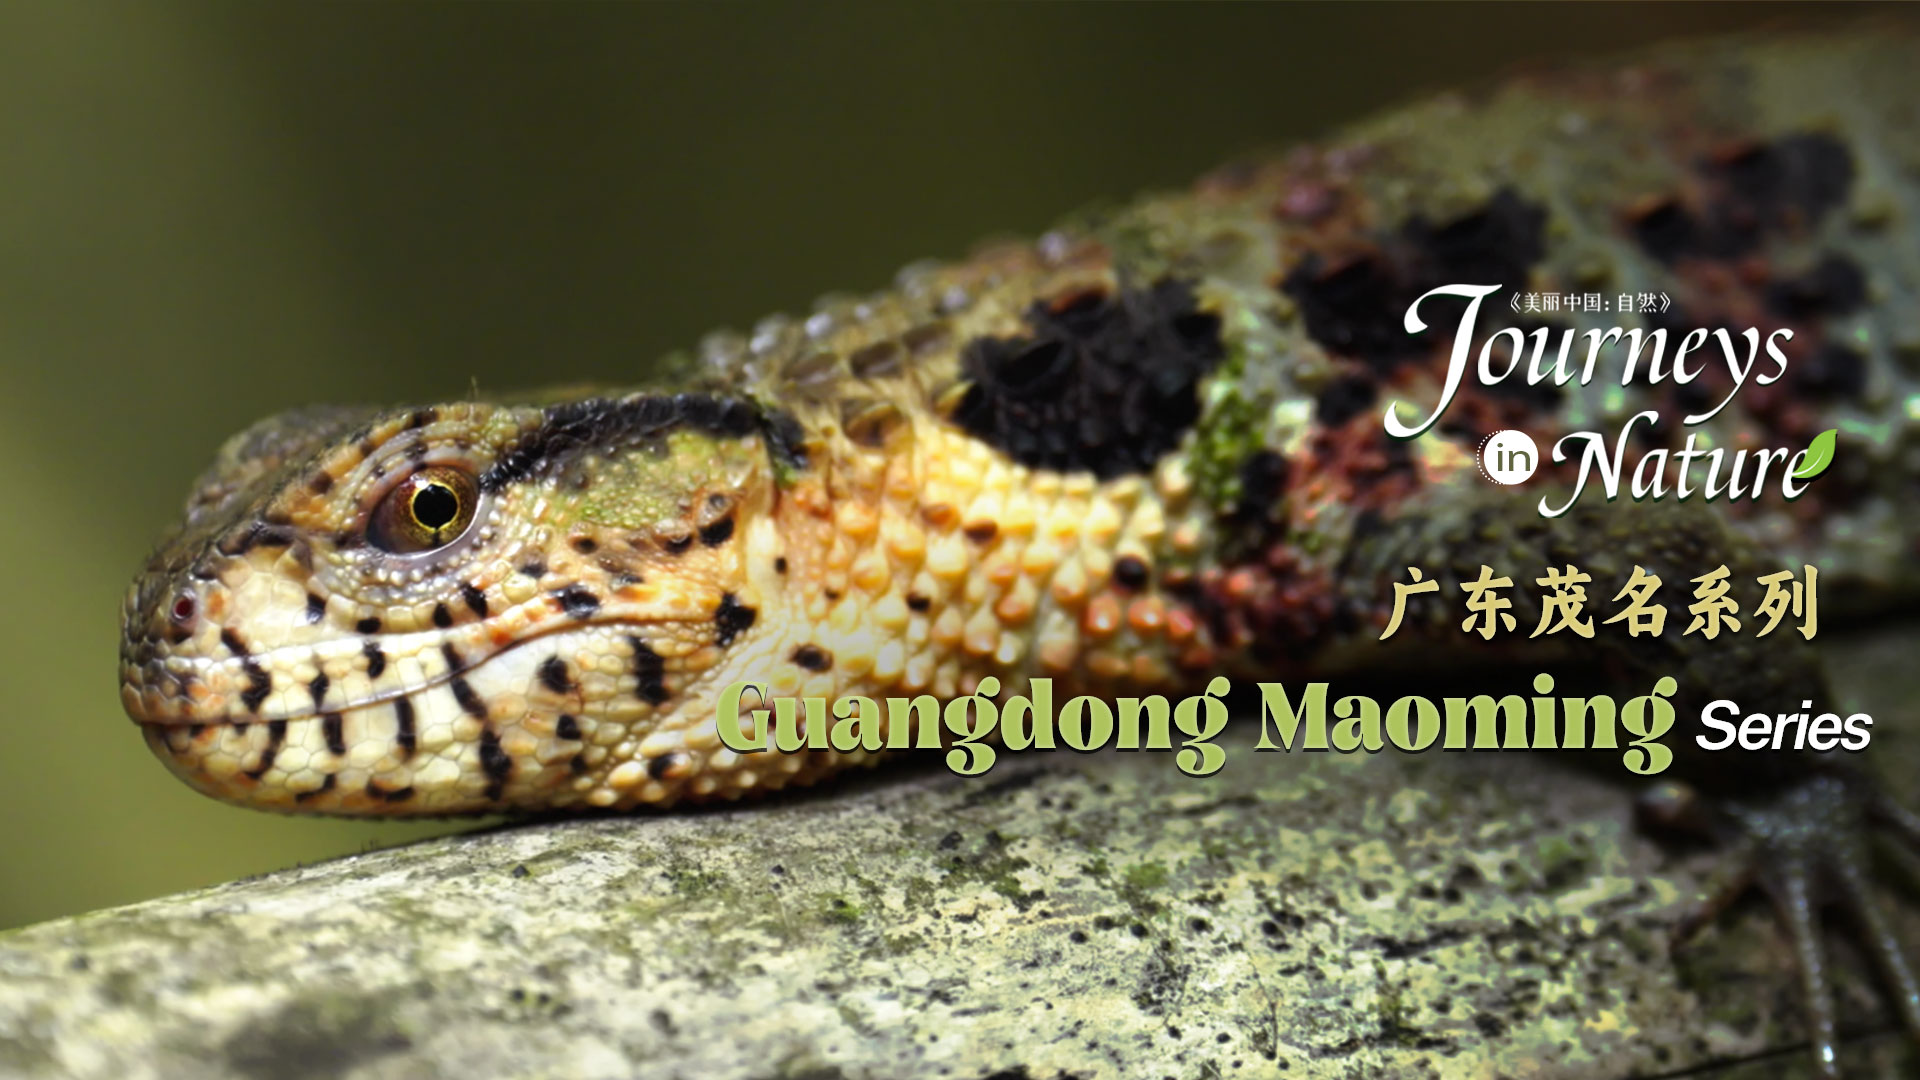 Guangdong Maoming Series Ep. 1: The Chinese crocodile lizard